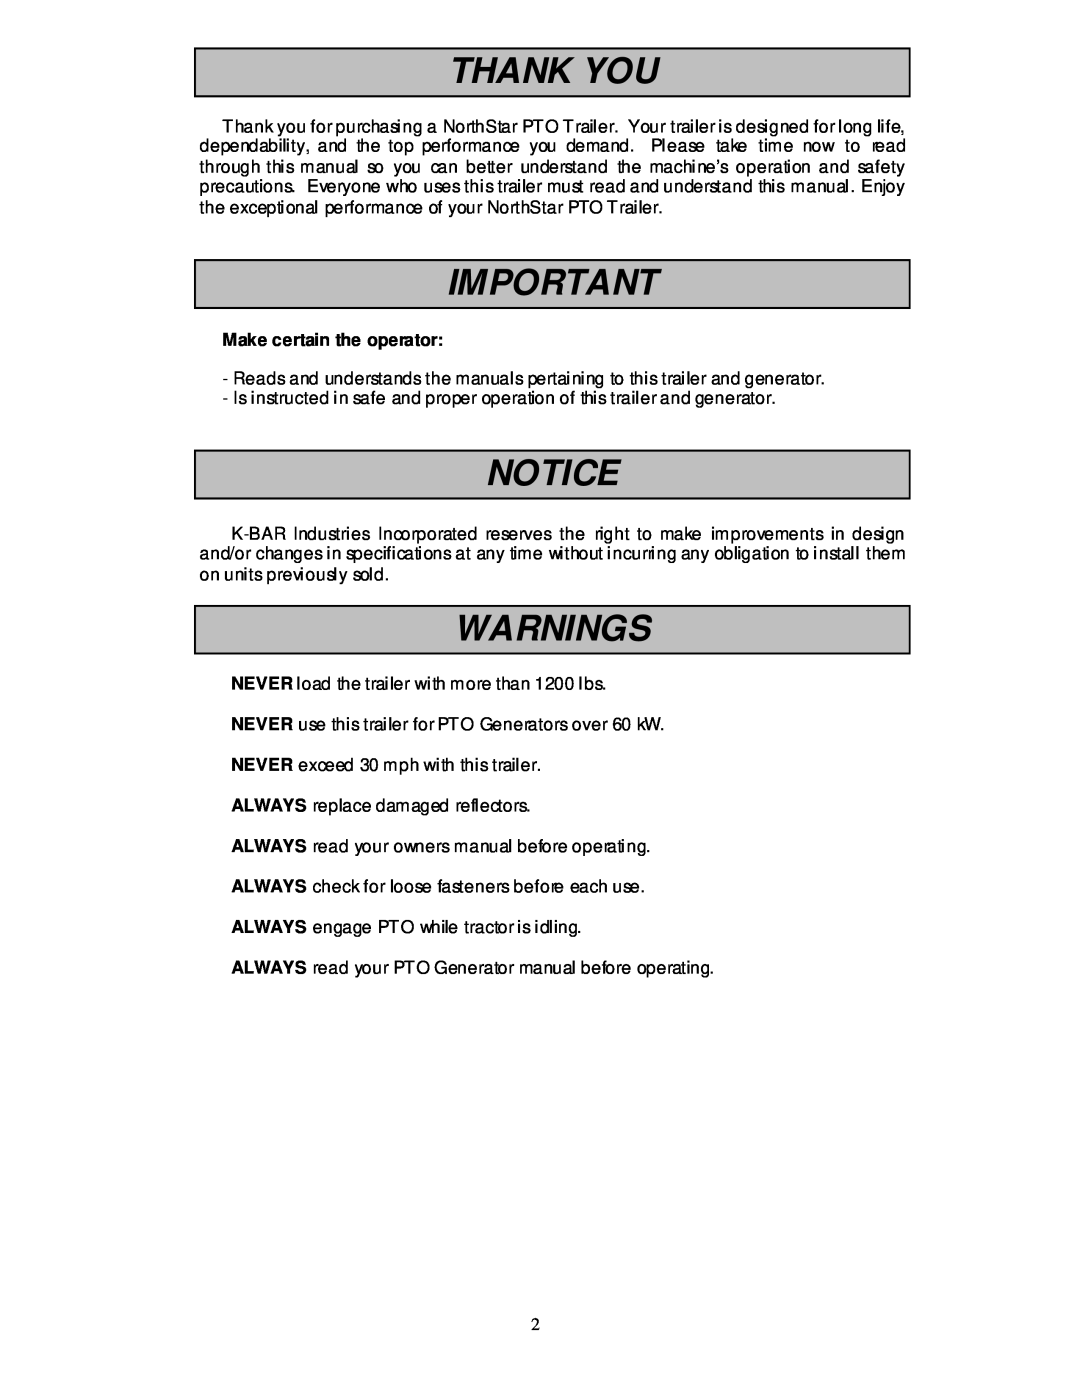 North Star 165959 owner manual Thank You, Warnings, Make certain the operator 